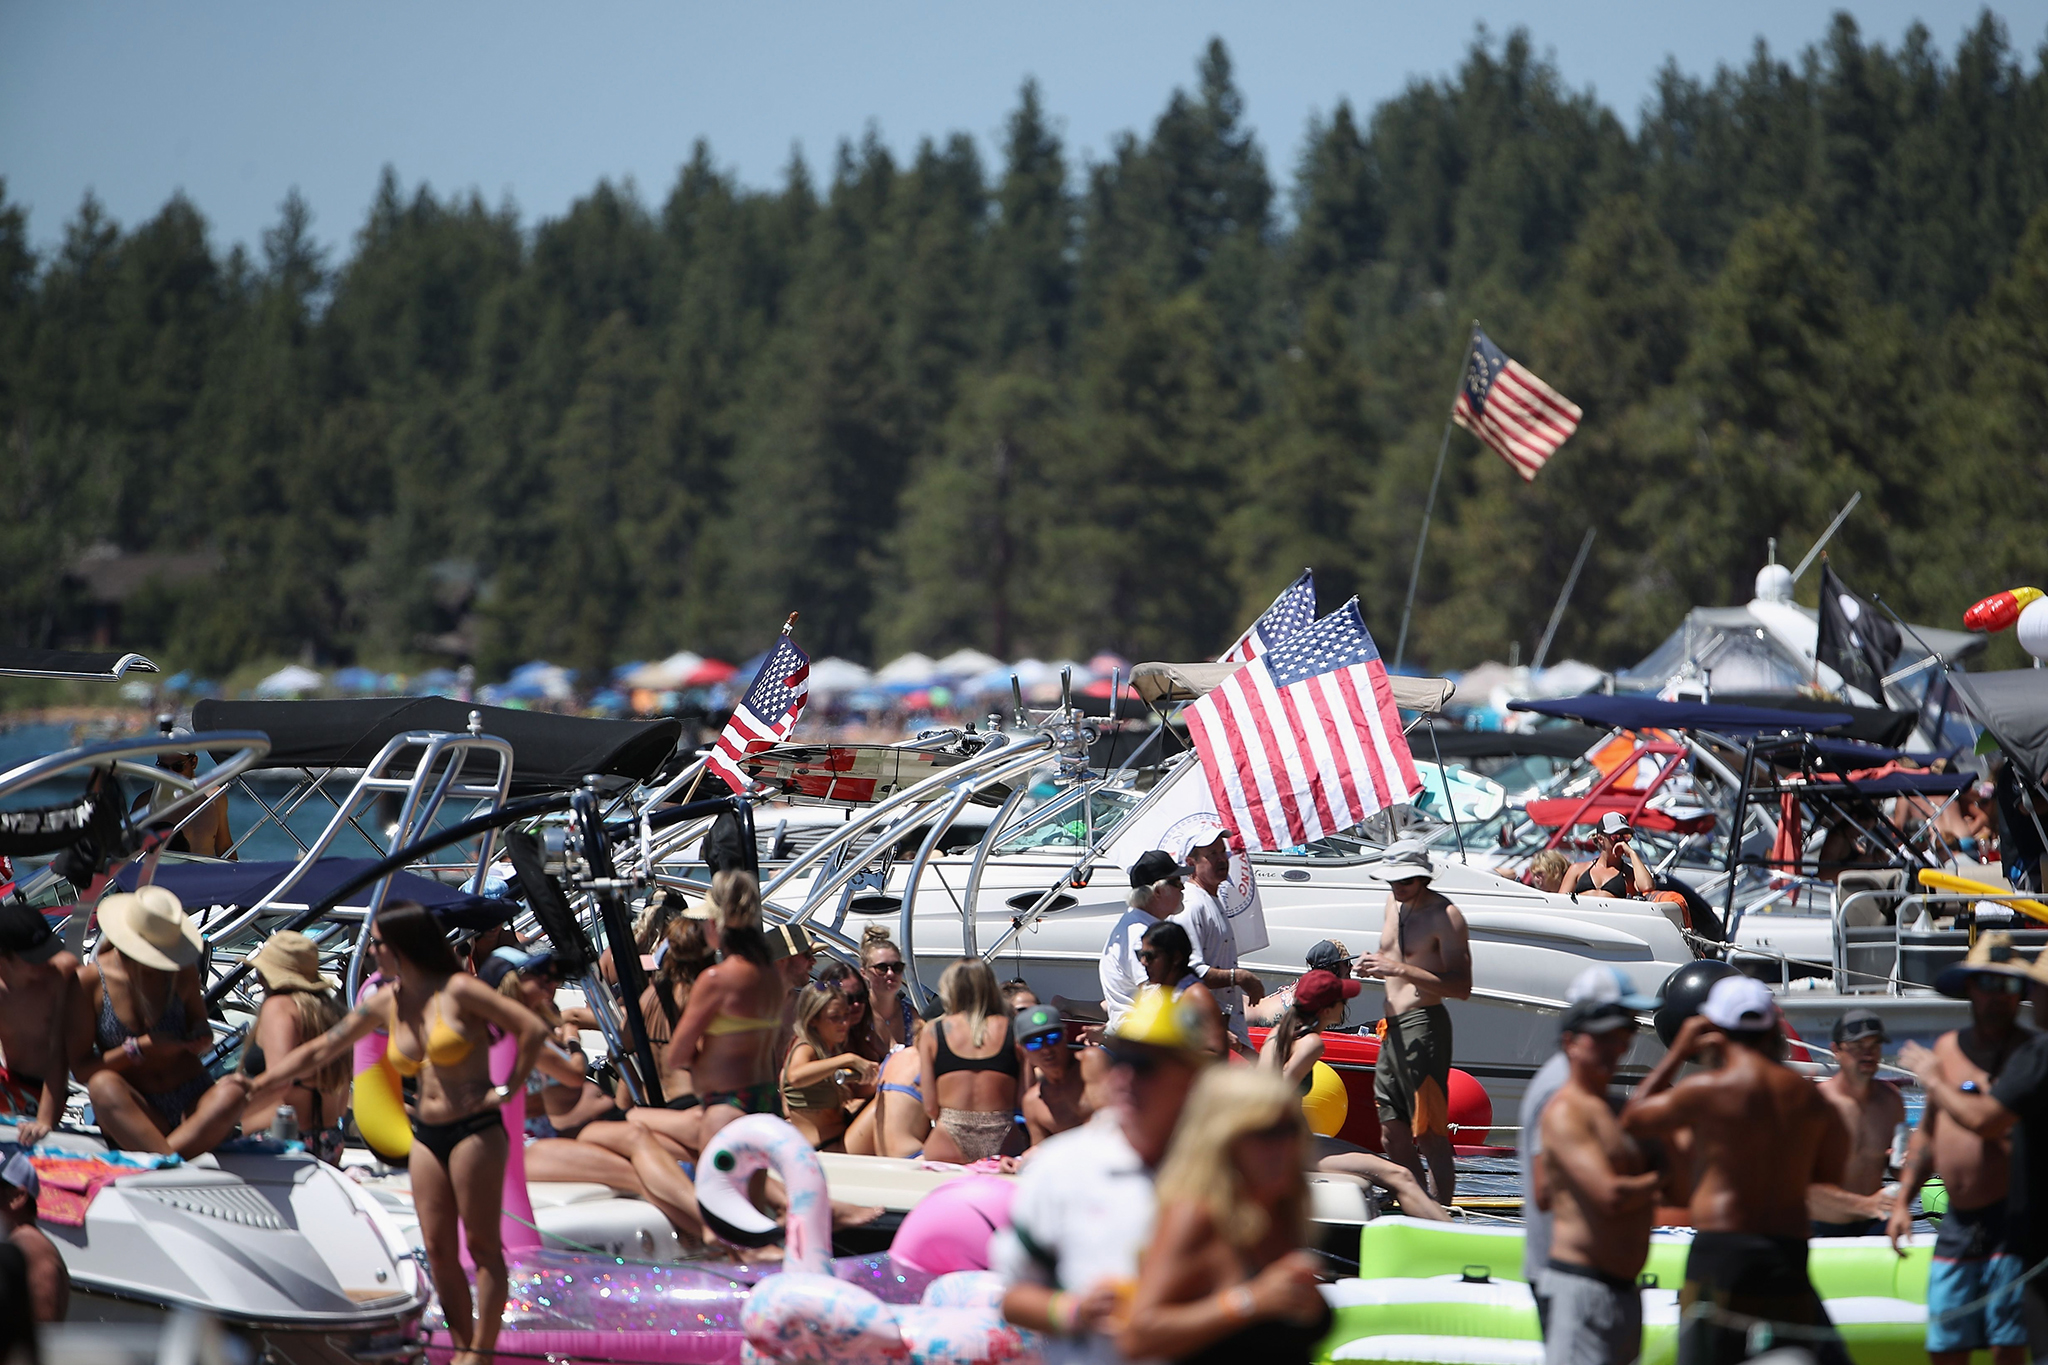 'Hectic beyond belief,' Tahoe braces for July Fourth chaos